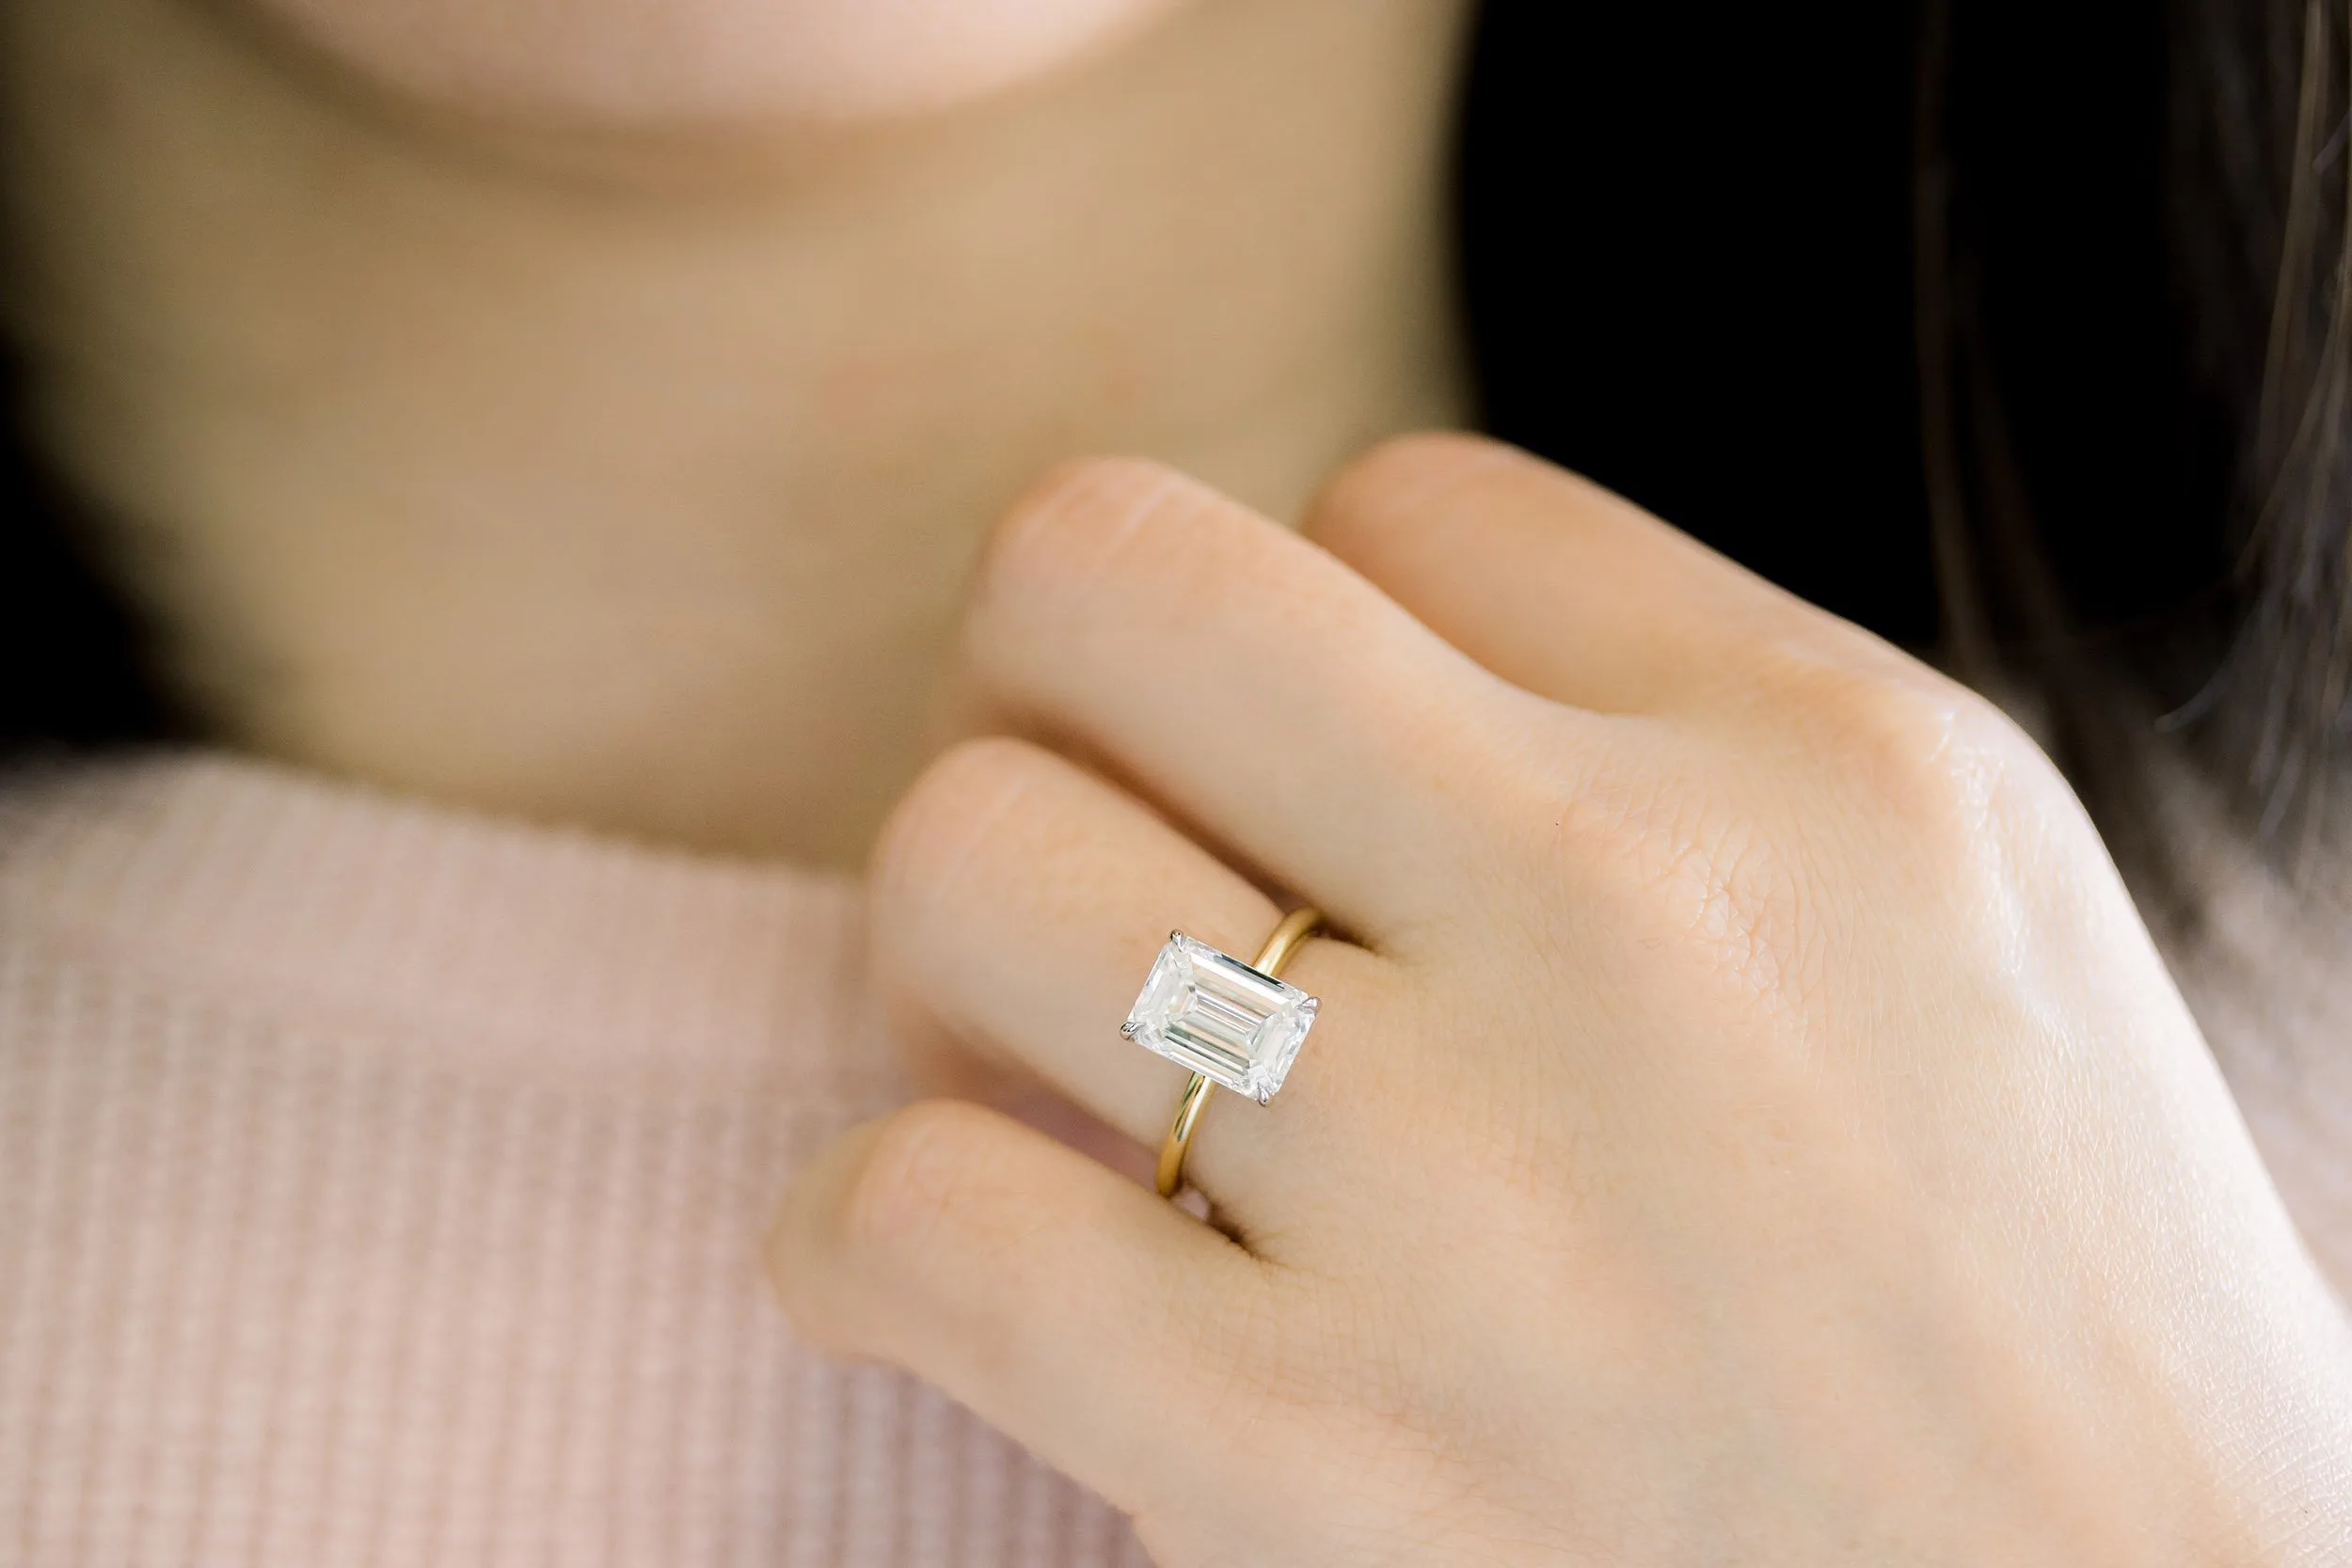 Emerald Cut Engagement Rings The Buying Guide For Everyone — Ouros Jewels